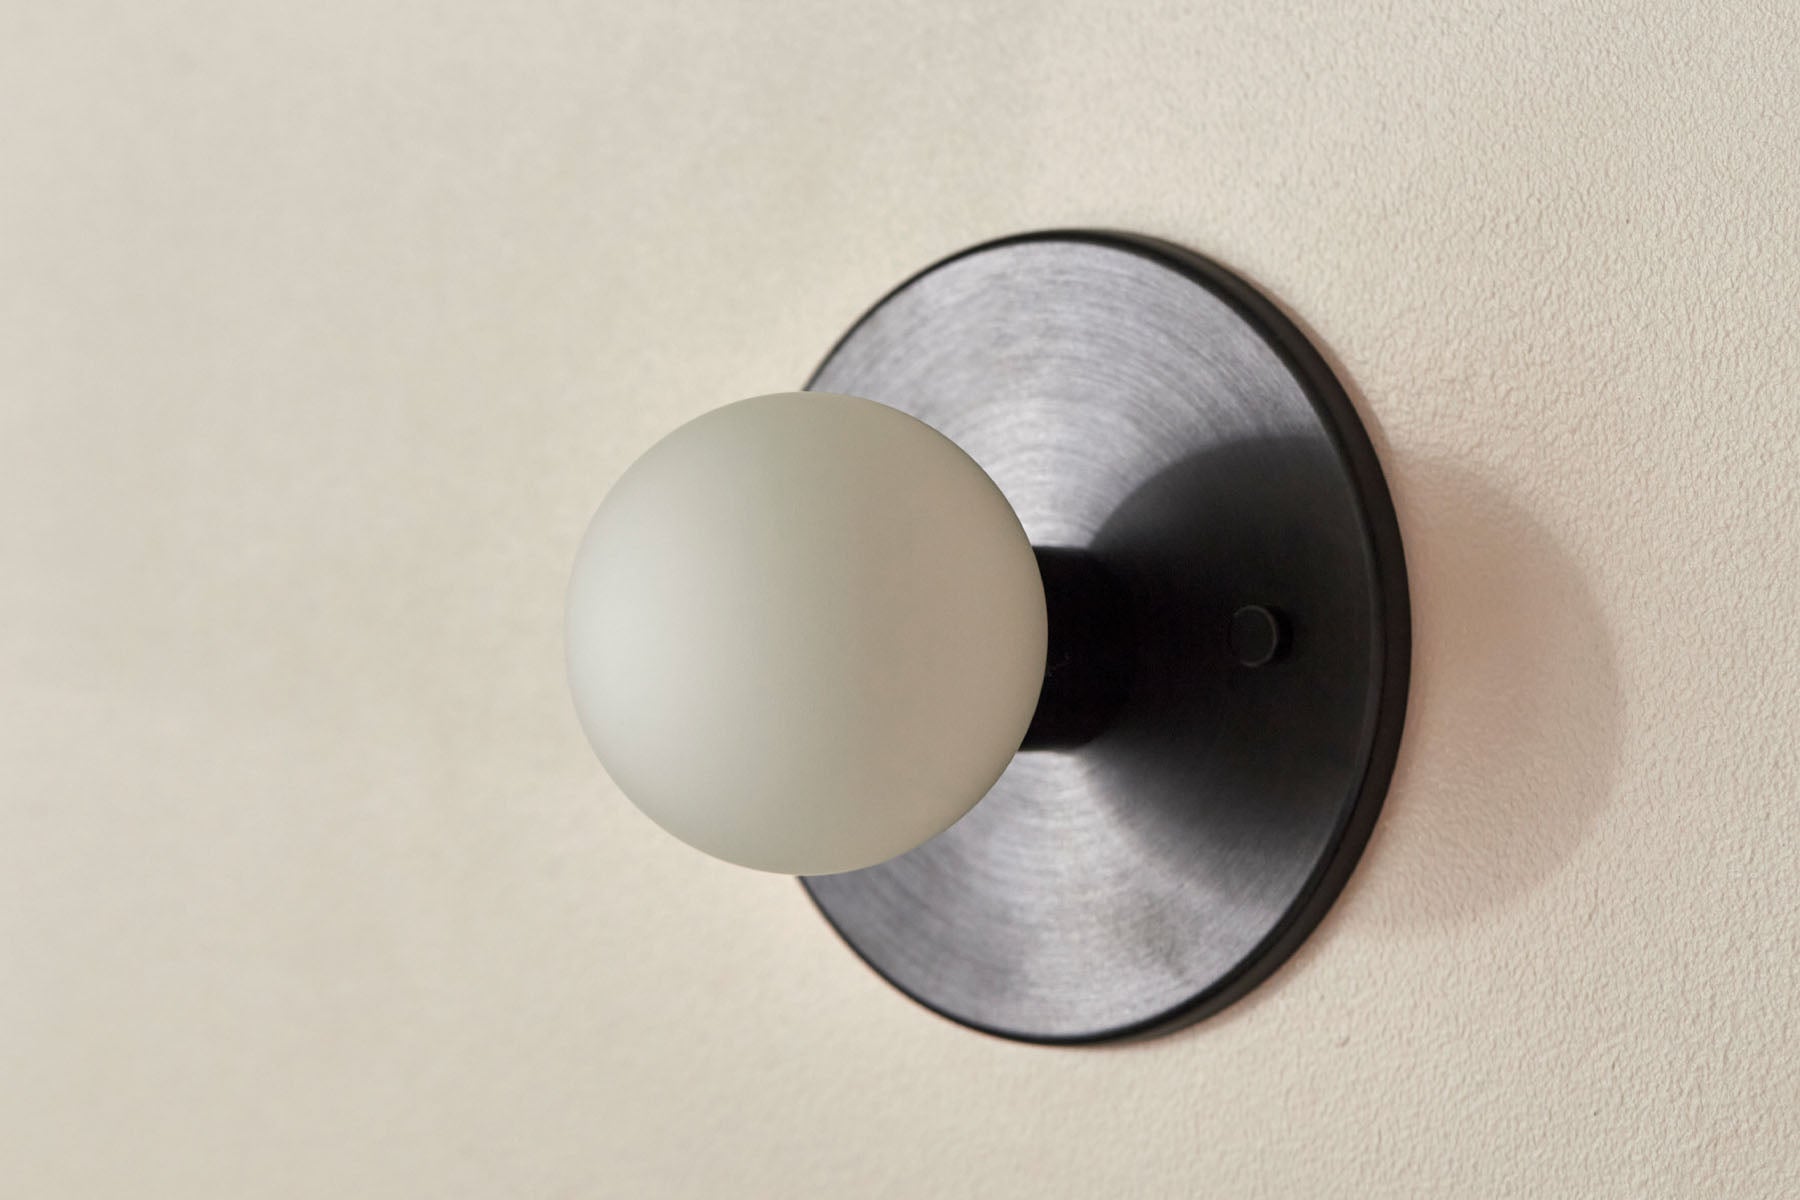 Orb Surface Sconce, Mini in Brushed Black and White Frosted. Image by Lawrence Furzey.